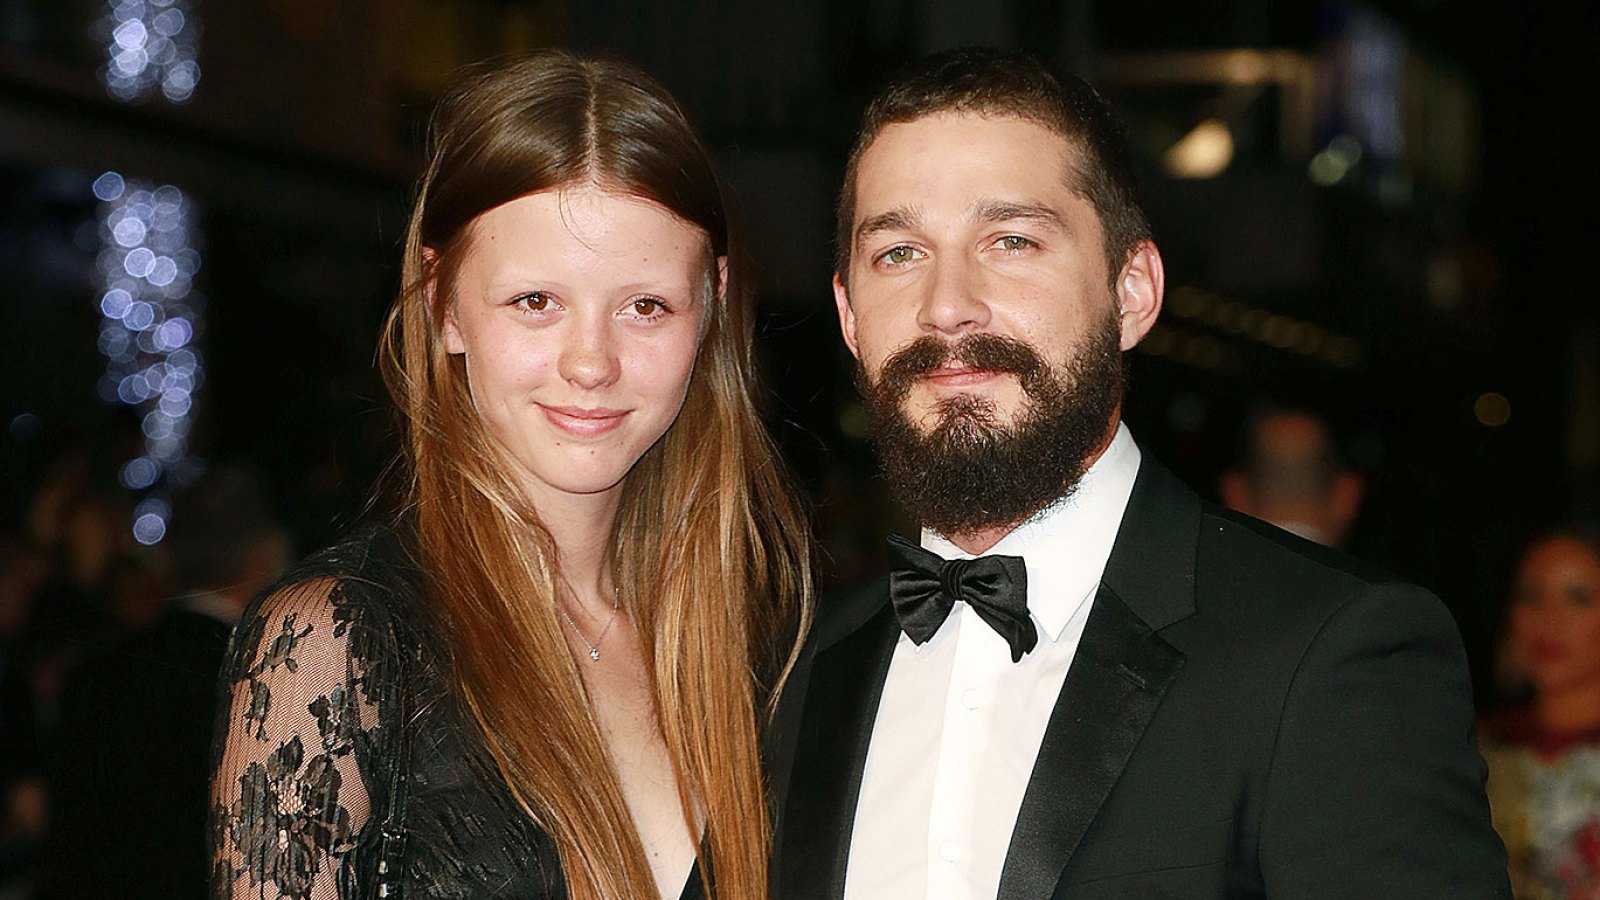 Shia LaBeouf's Partner Mia Goth Gives Birth, Welcomes Her 1st Baby